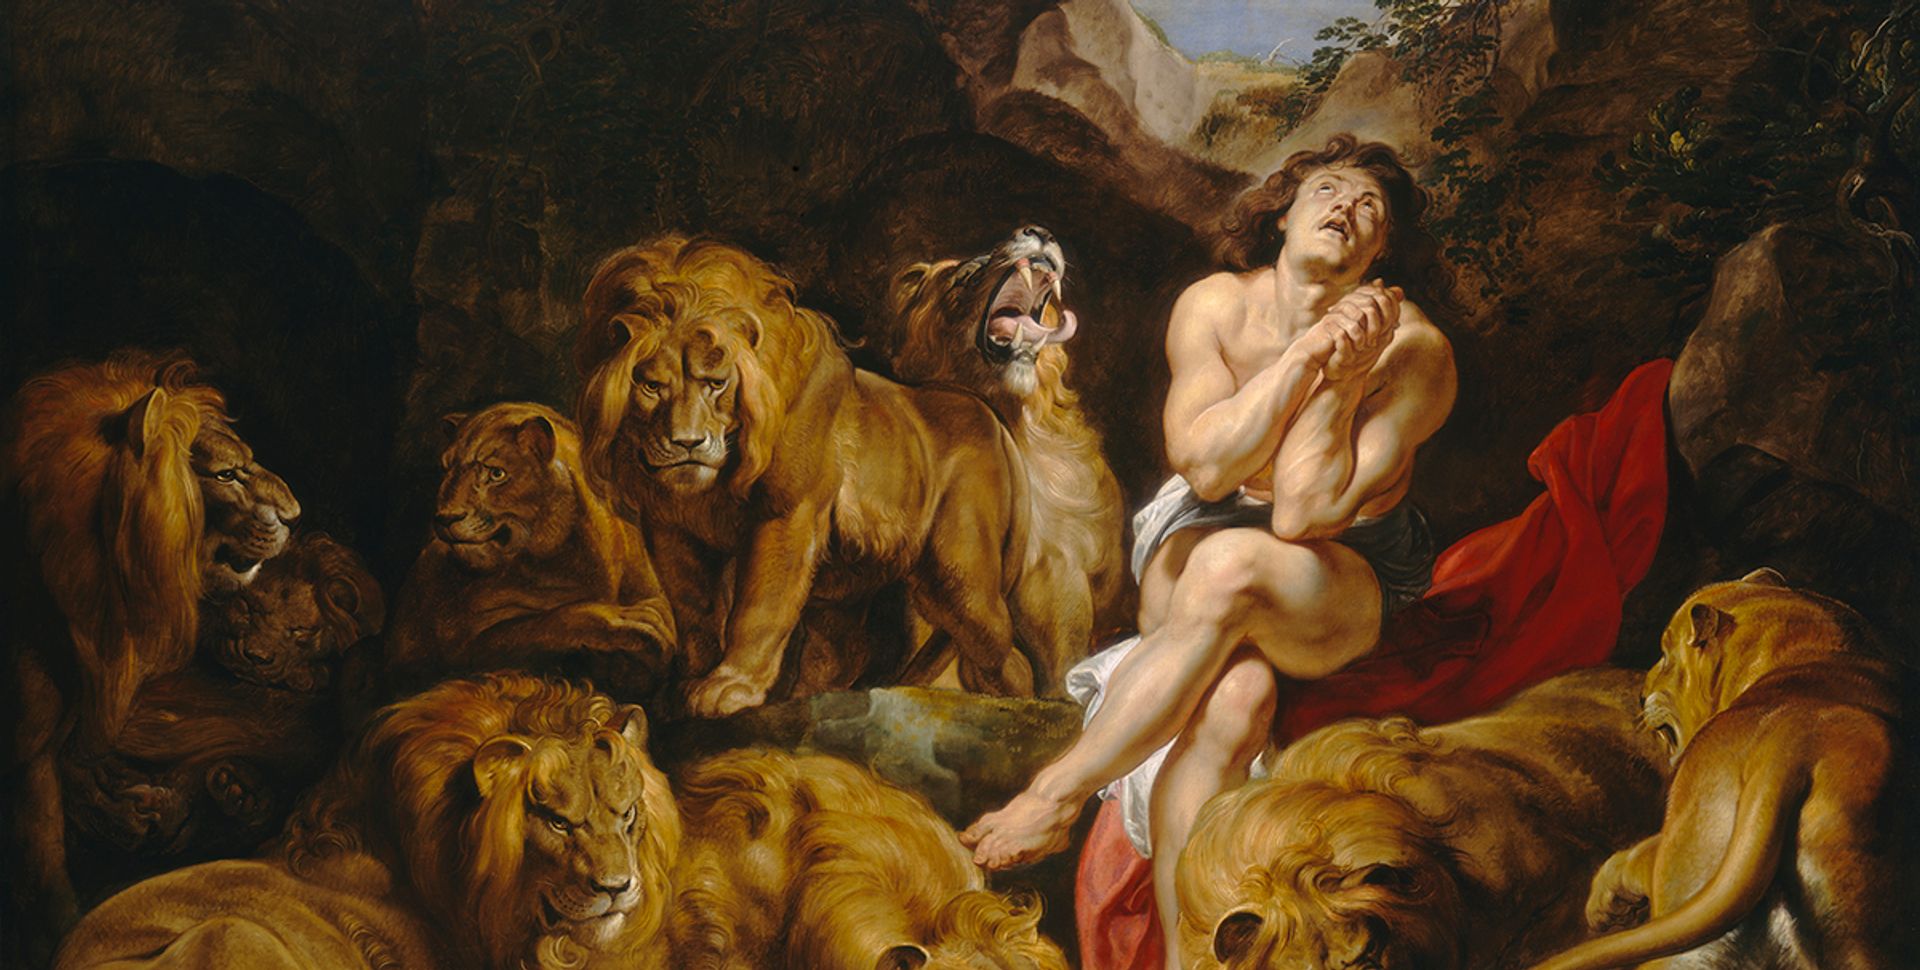 Peter Paul Rubens, Daniel in the Lions' Den (around 1614-16) Courtesy of the Fine Arts Museums of San Francisco